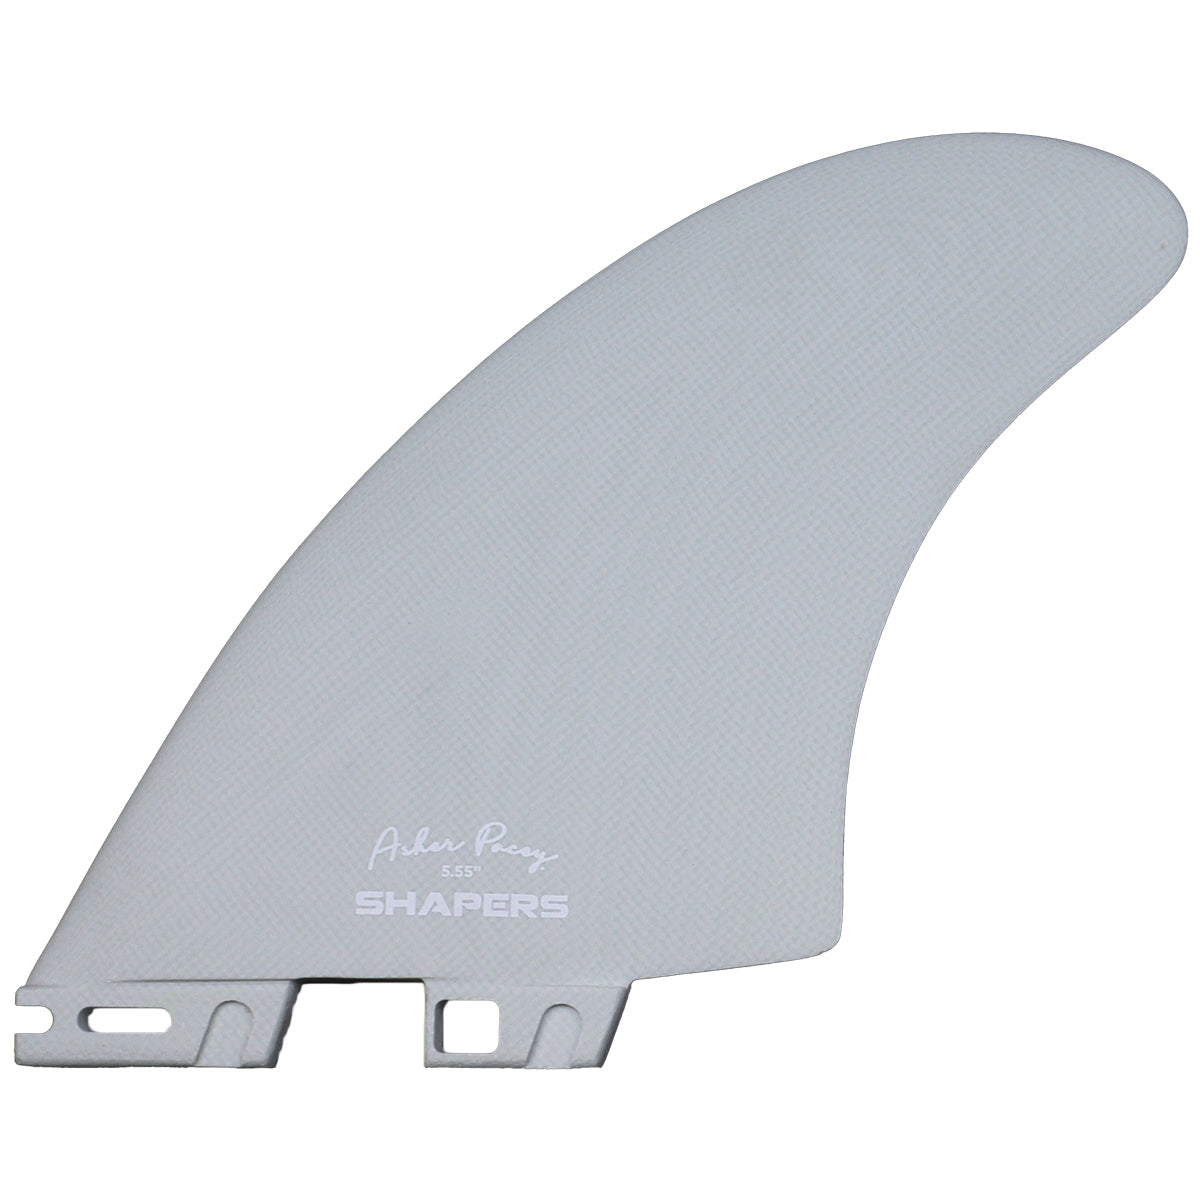 Shapers Asher Pacey FCS II Compatible Twin + 1 Fin Set - 5.55 